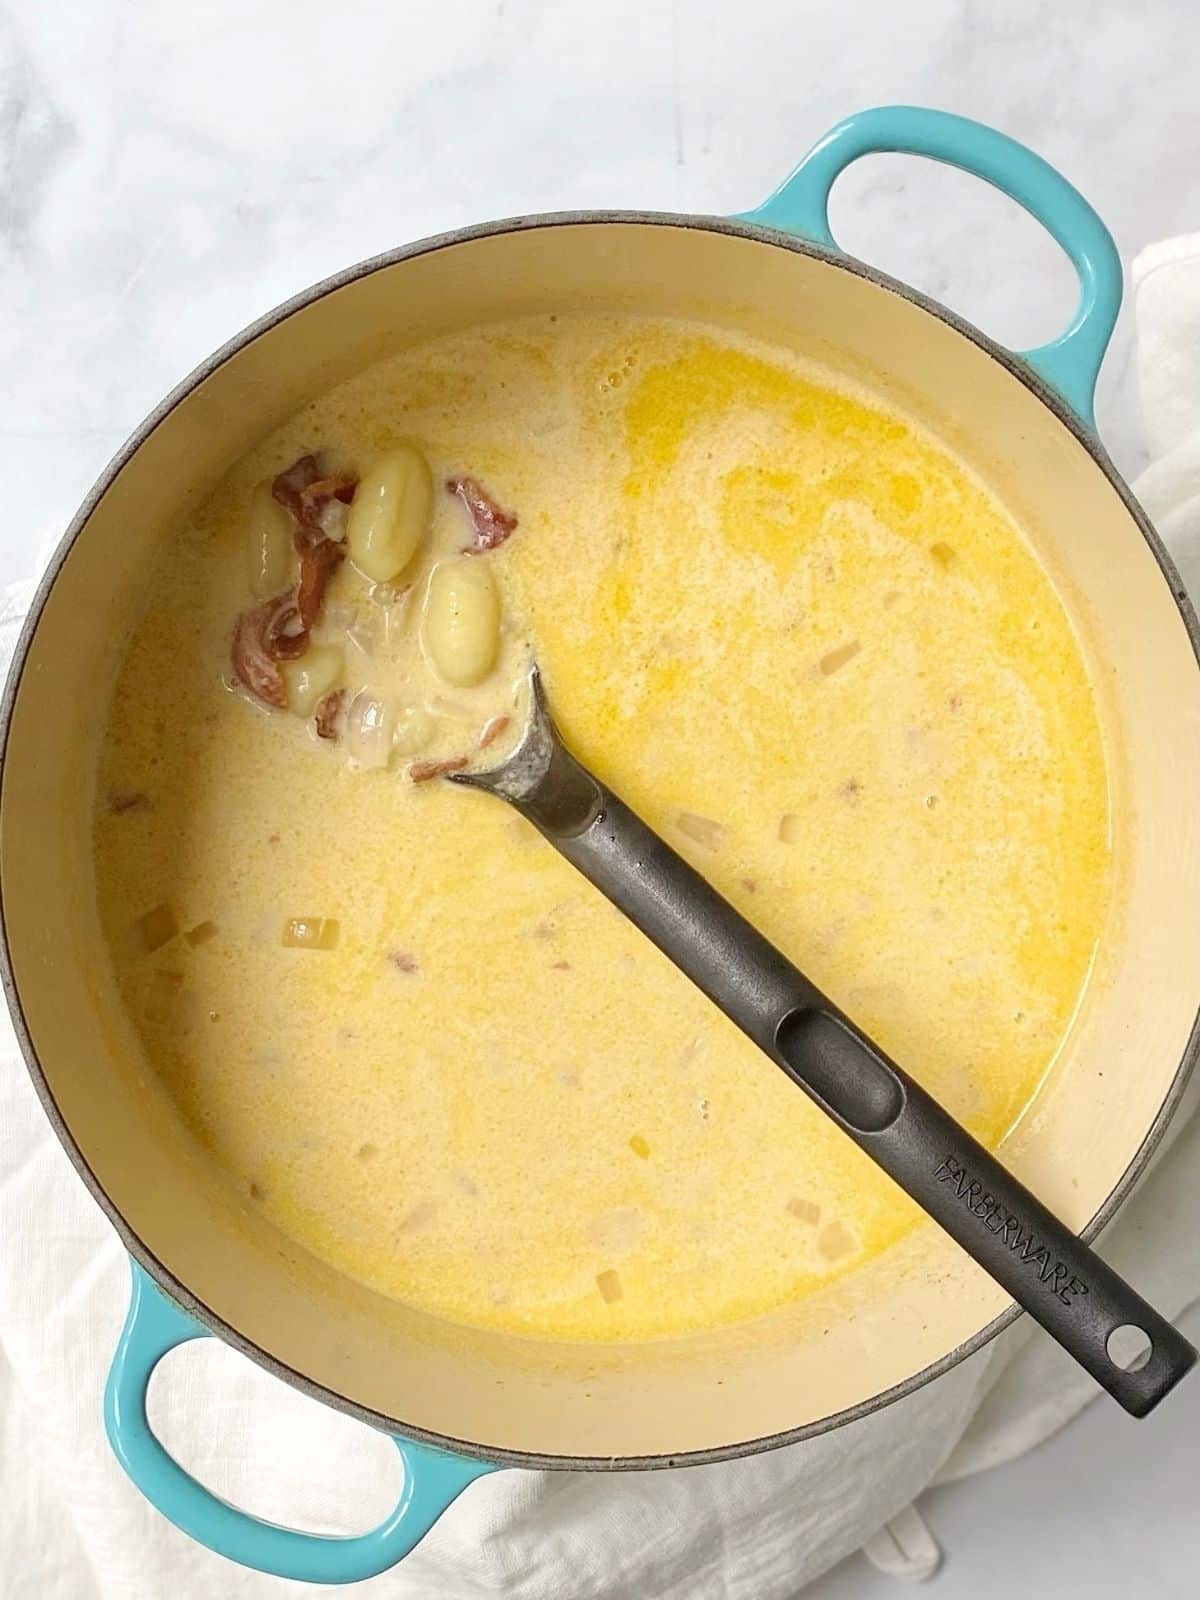 stir in cream and shredded cheese to potato gnocchi soup